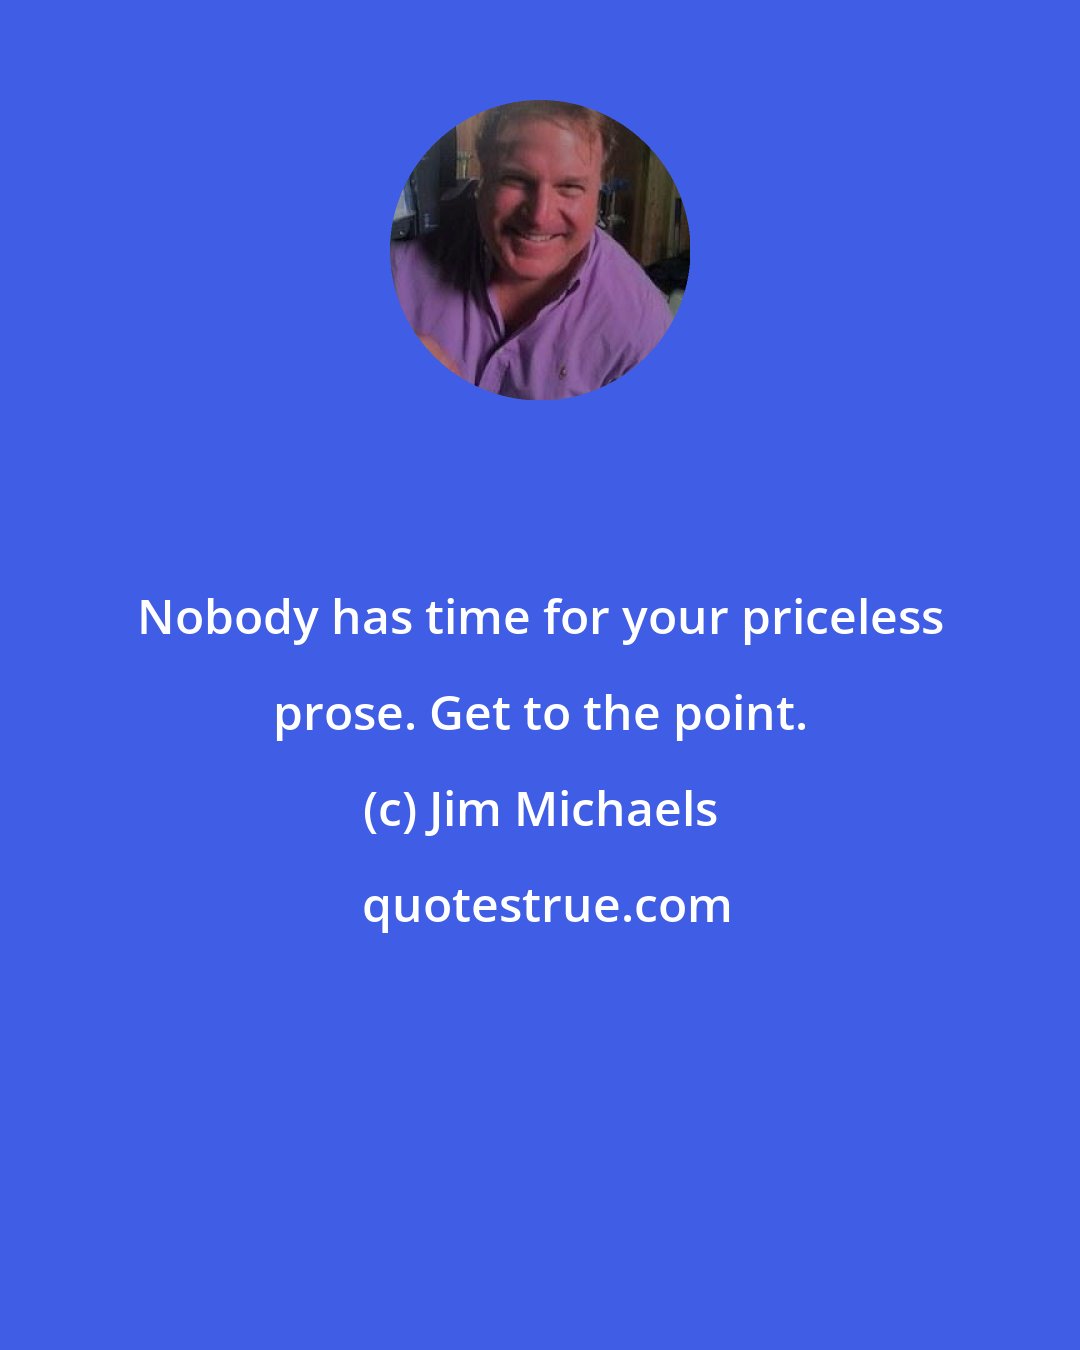 Jim Michaels: Nobody has time for your priceless prose. Get to the point.